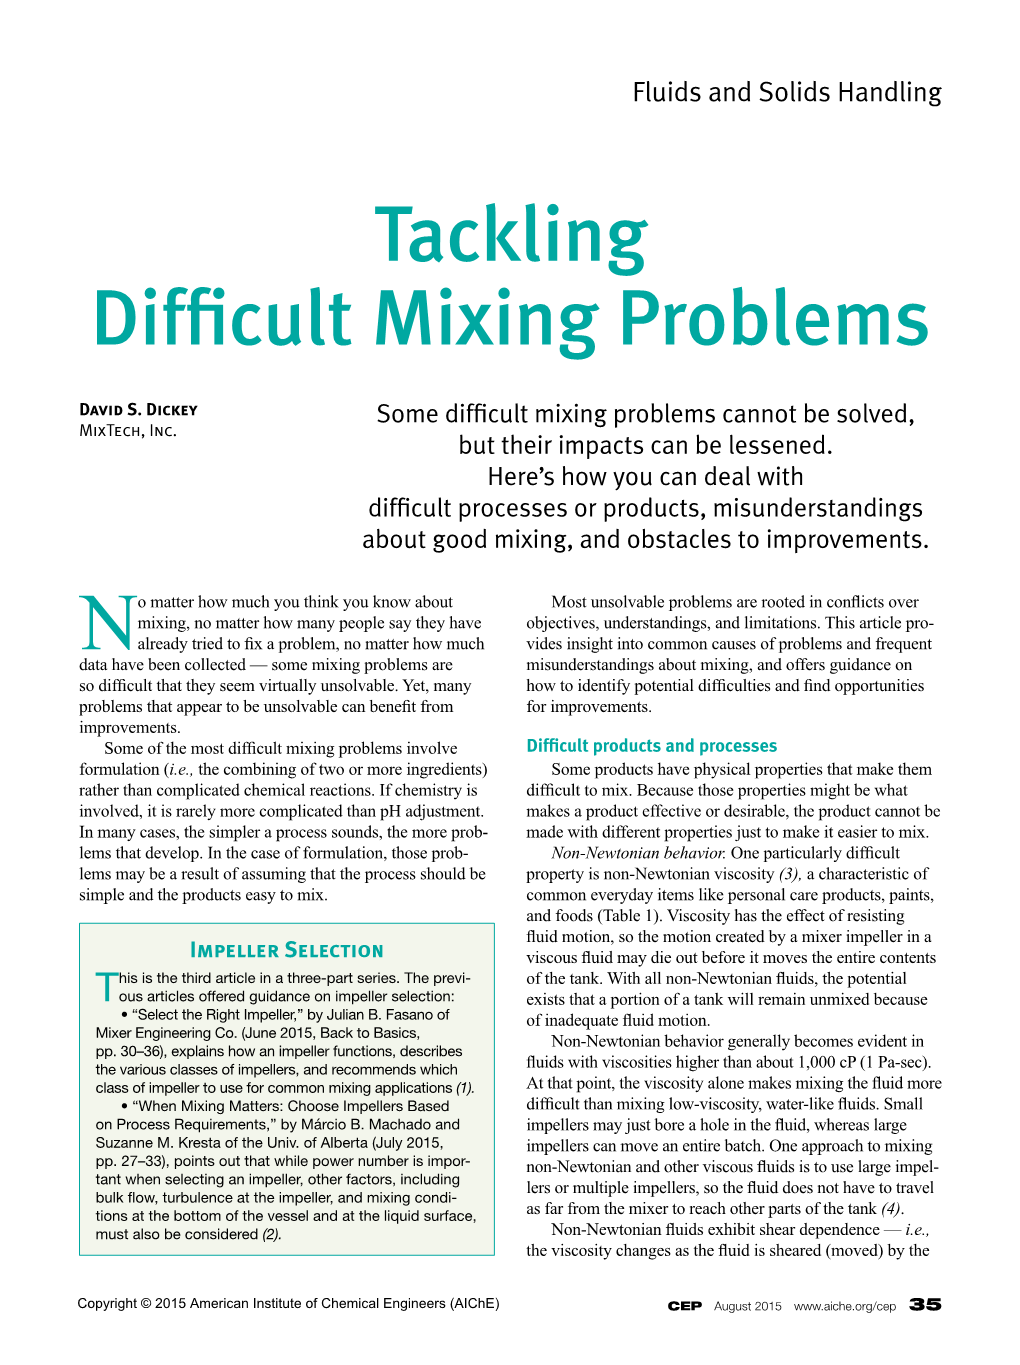 Tackling Difficult Mixing Problems